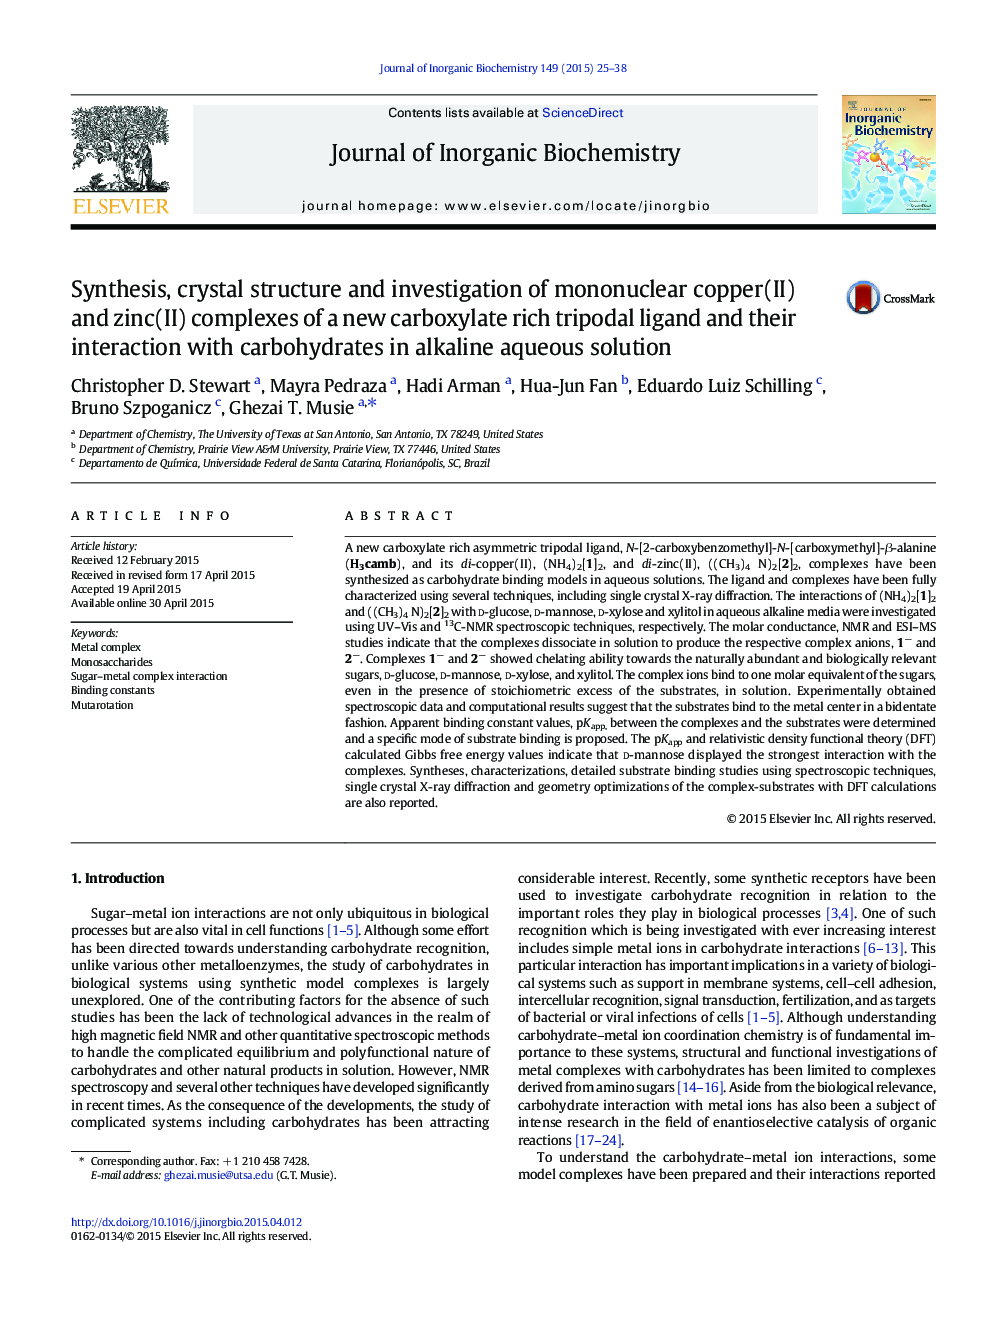 Synthesis, crystal structure and investigation of mononuclear copper(II) and zinc(II) complexes of a new carboxylate rich tripodal ligand and their interaction with carbohydrates in alkaline aqueous solution